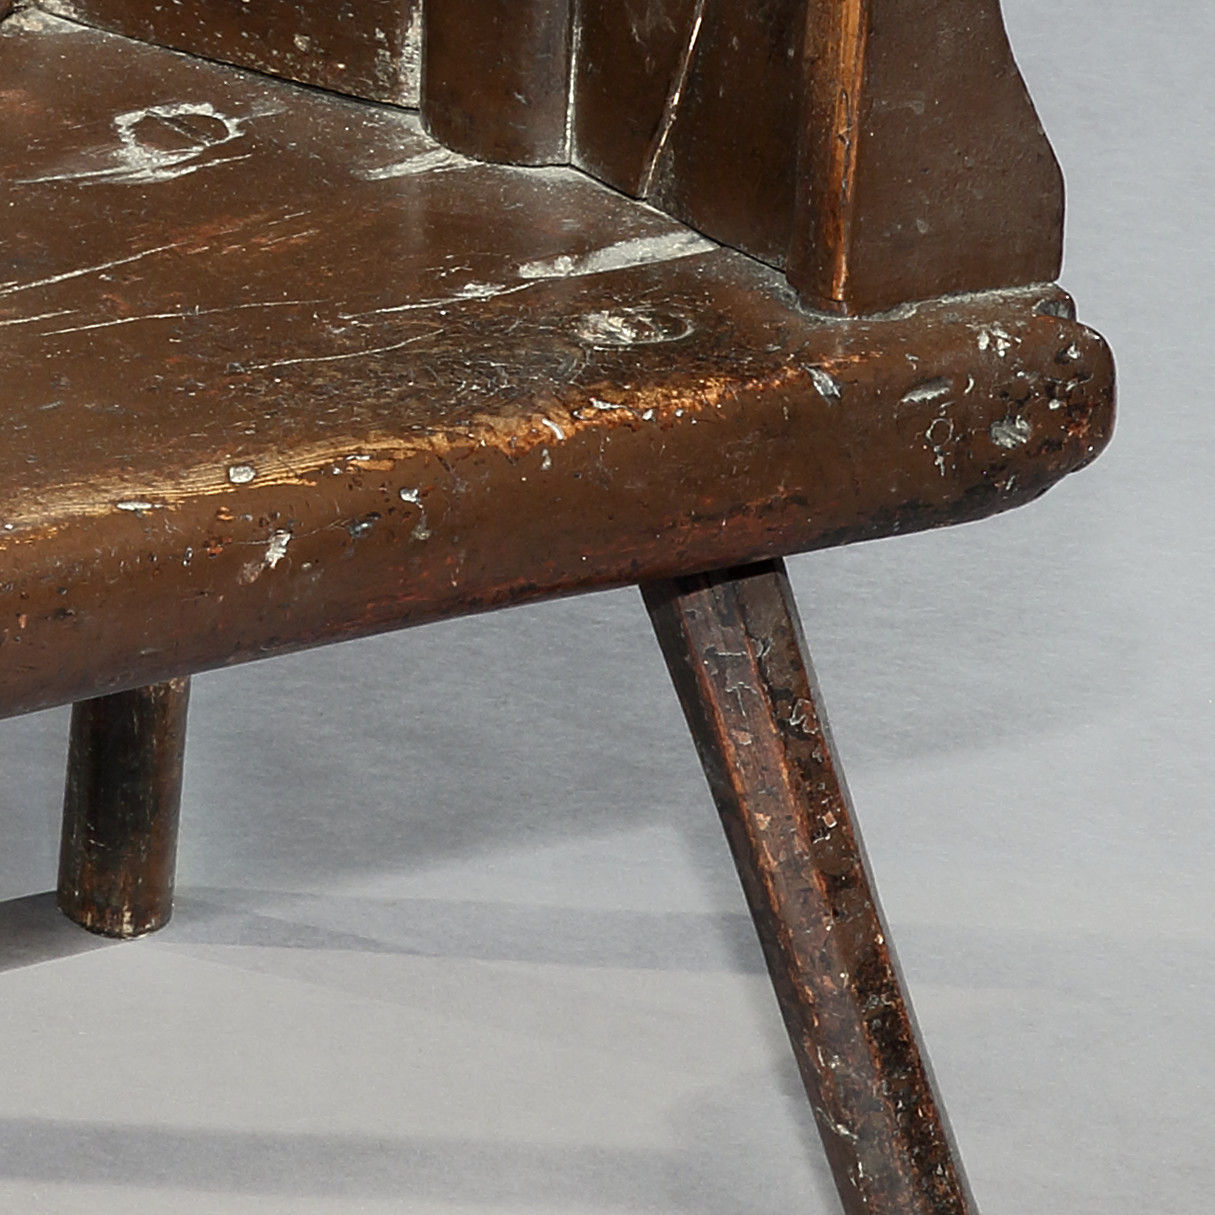 Rare and Sculptural Shepherd’s Windsor Plank Chair